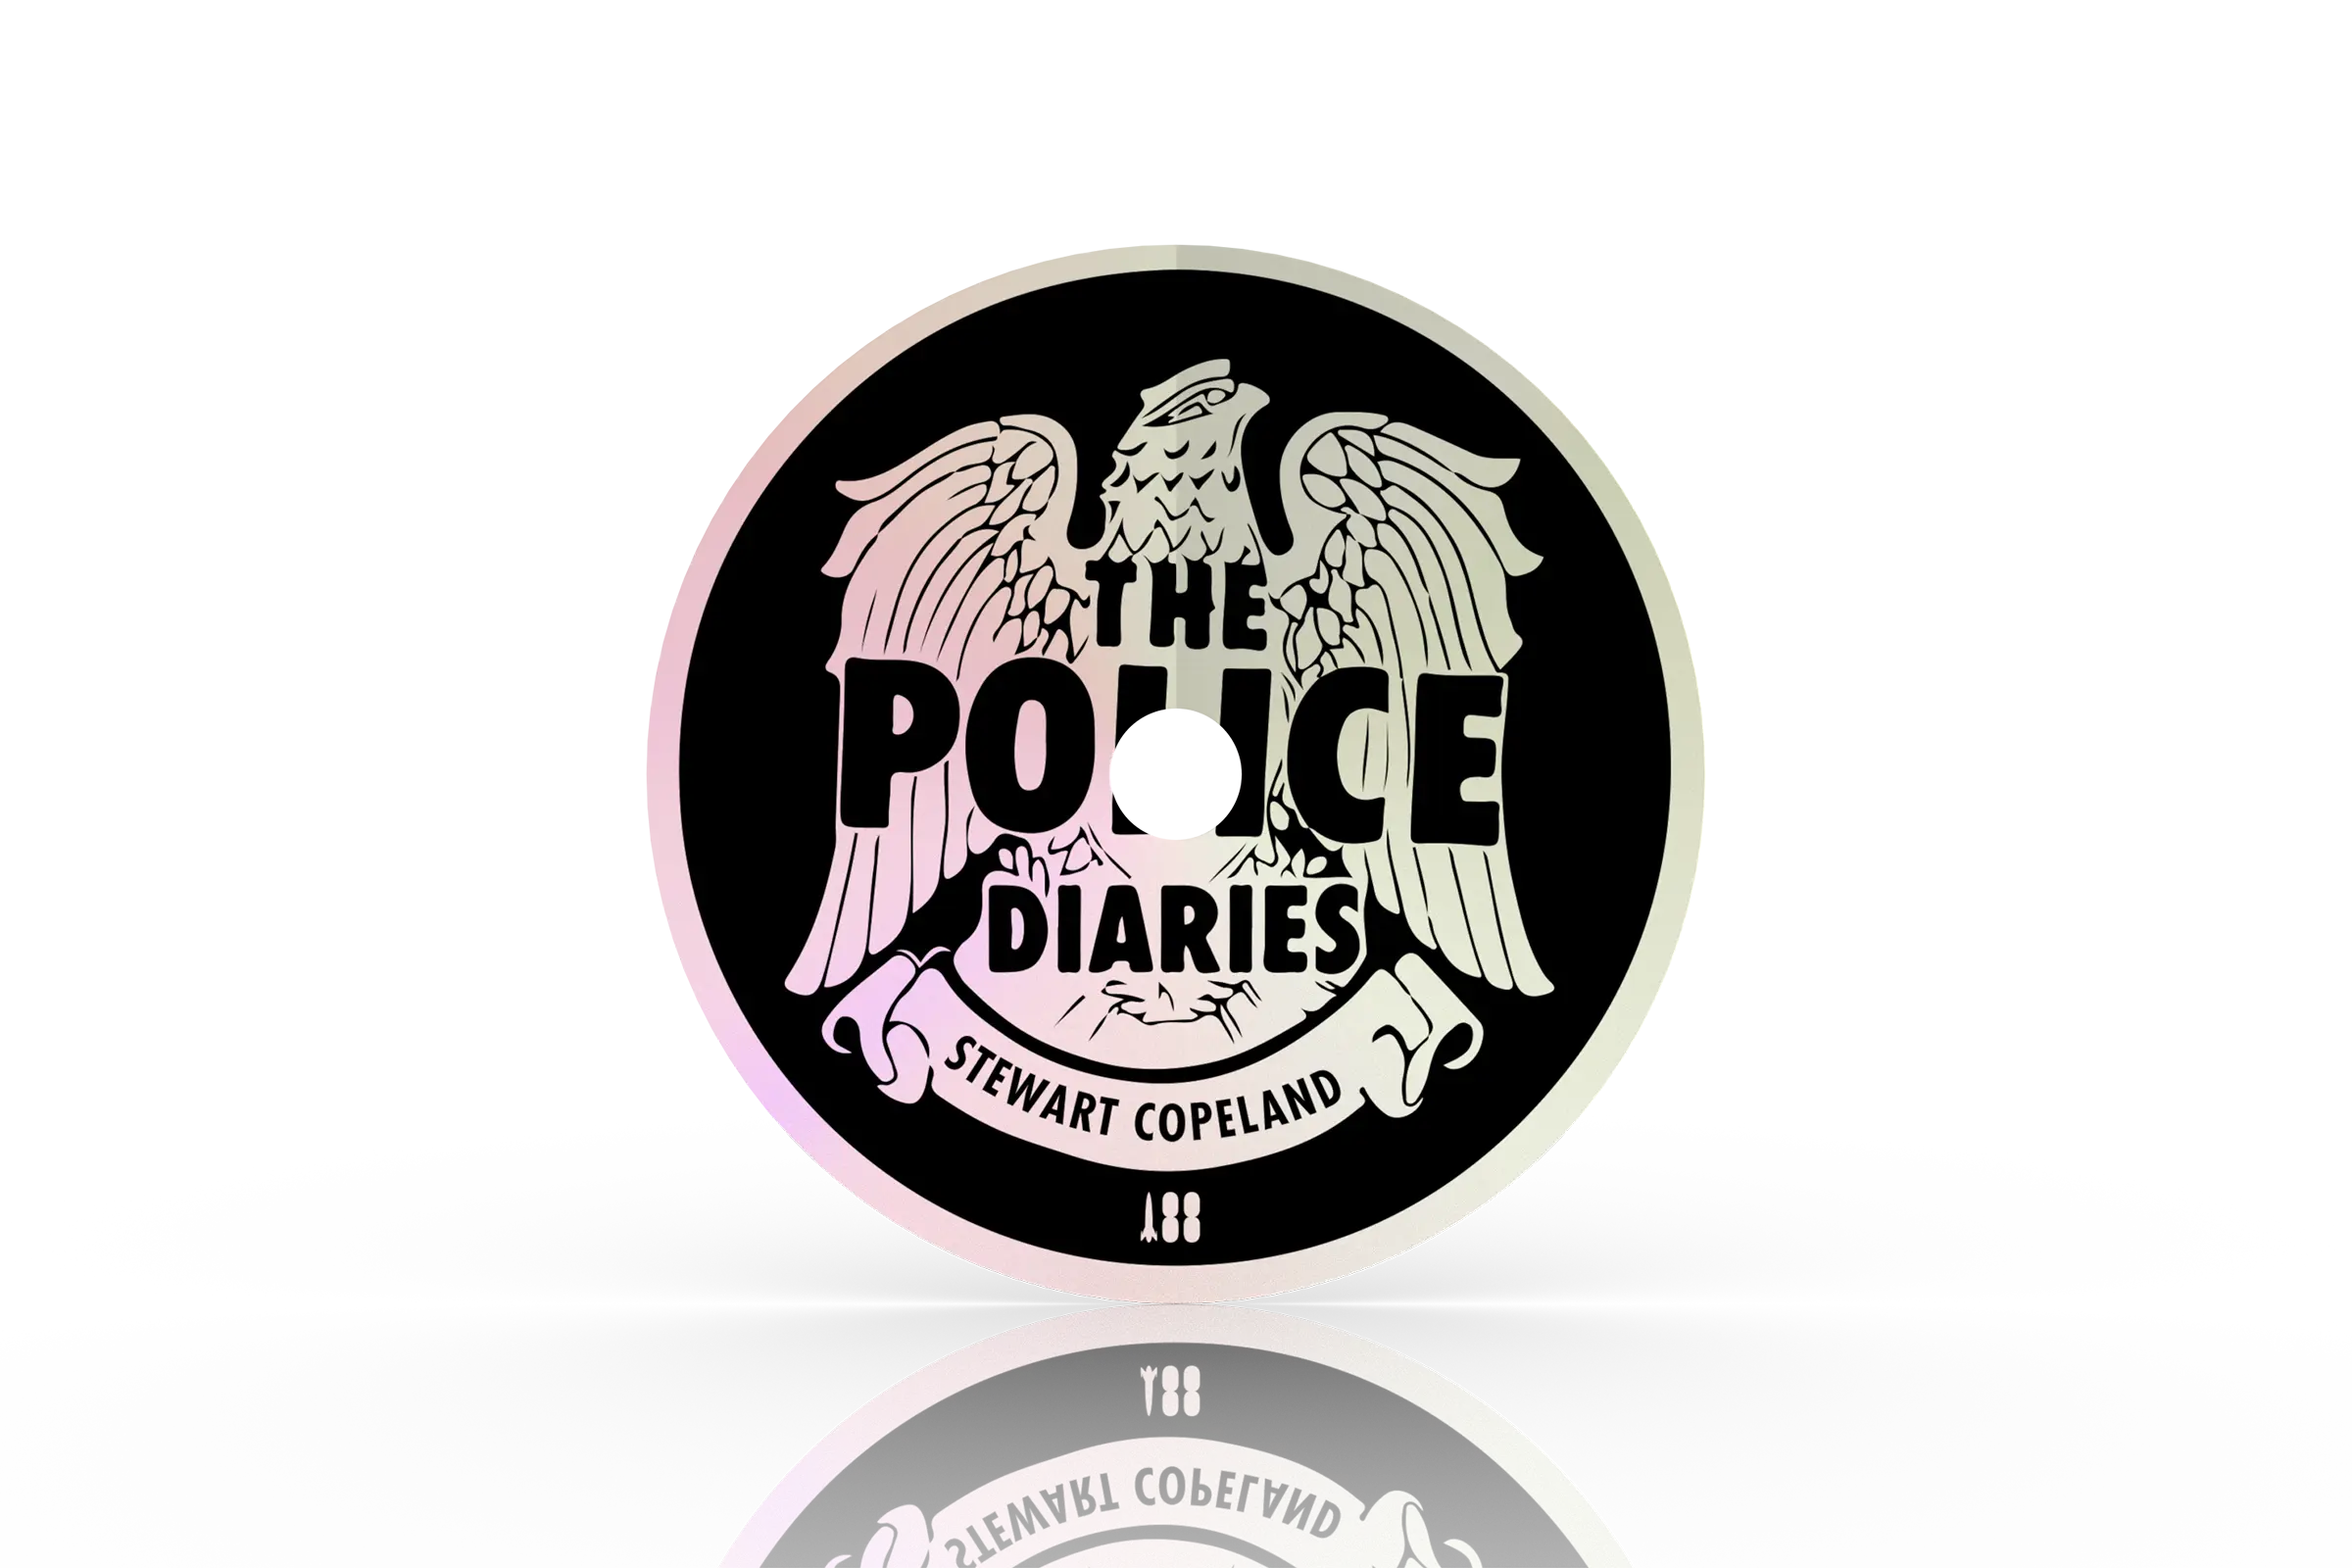 Stewart Copeland's Police Diaries, published by Rocket 88